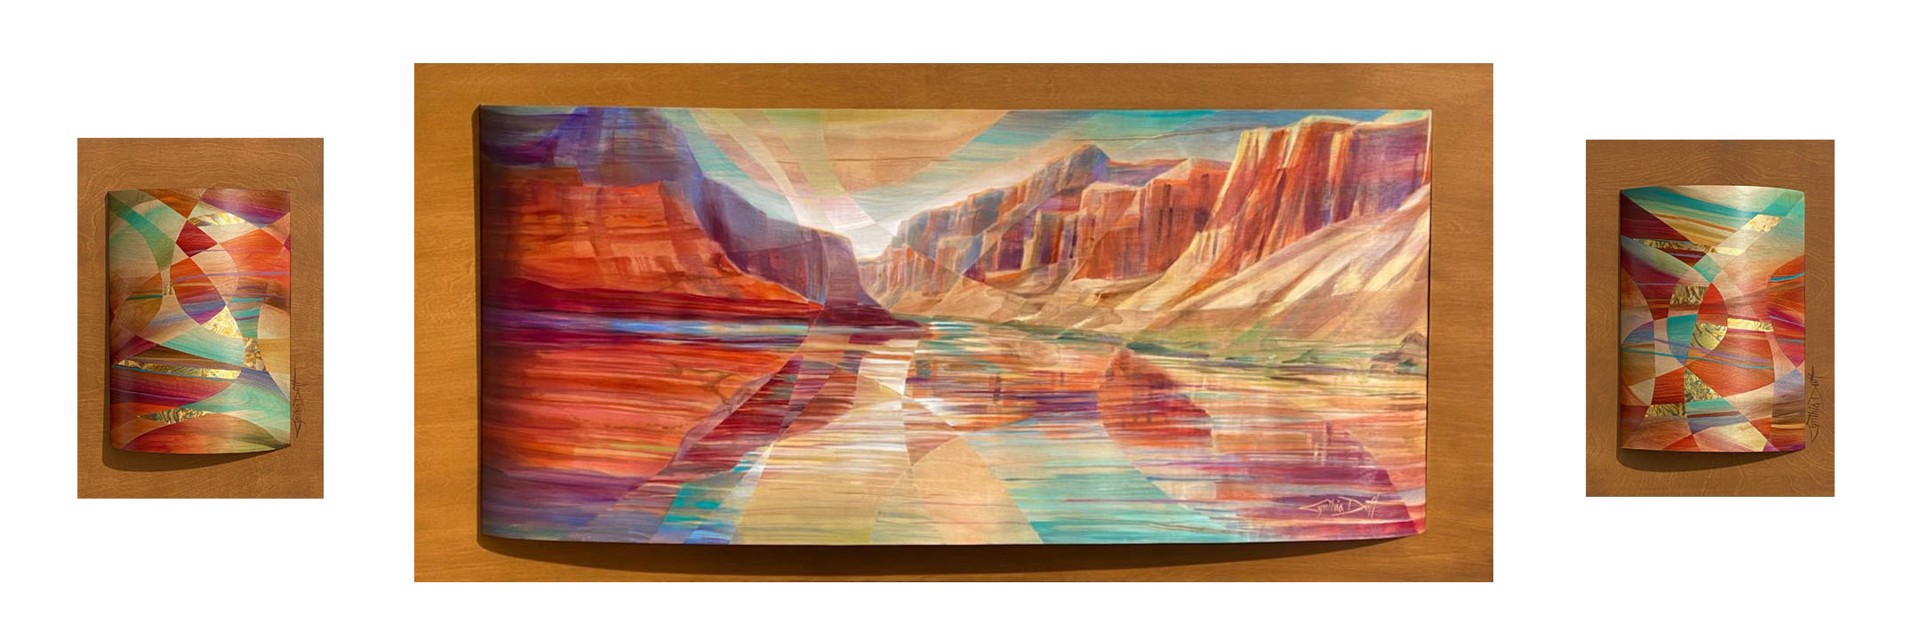 MacDonald Bennett Commission Based on Rivers Voice with Curved Horizonal painting. by Cynthia Duff